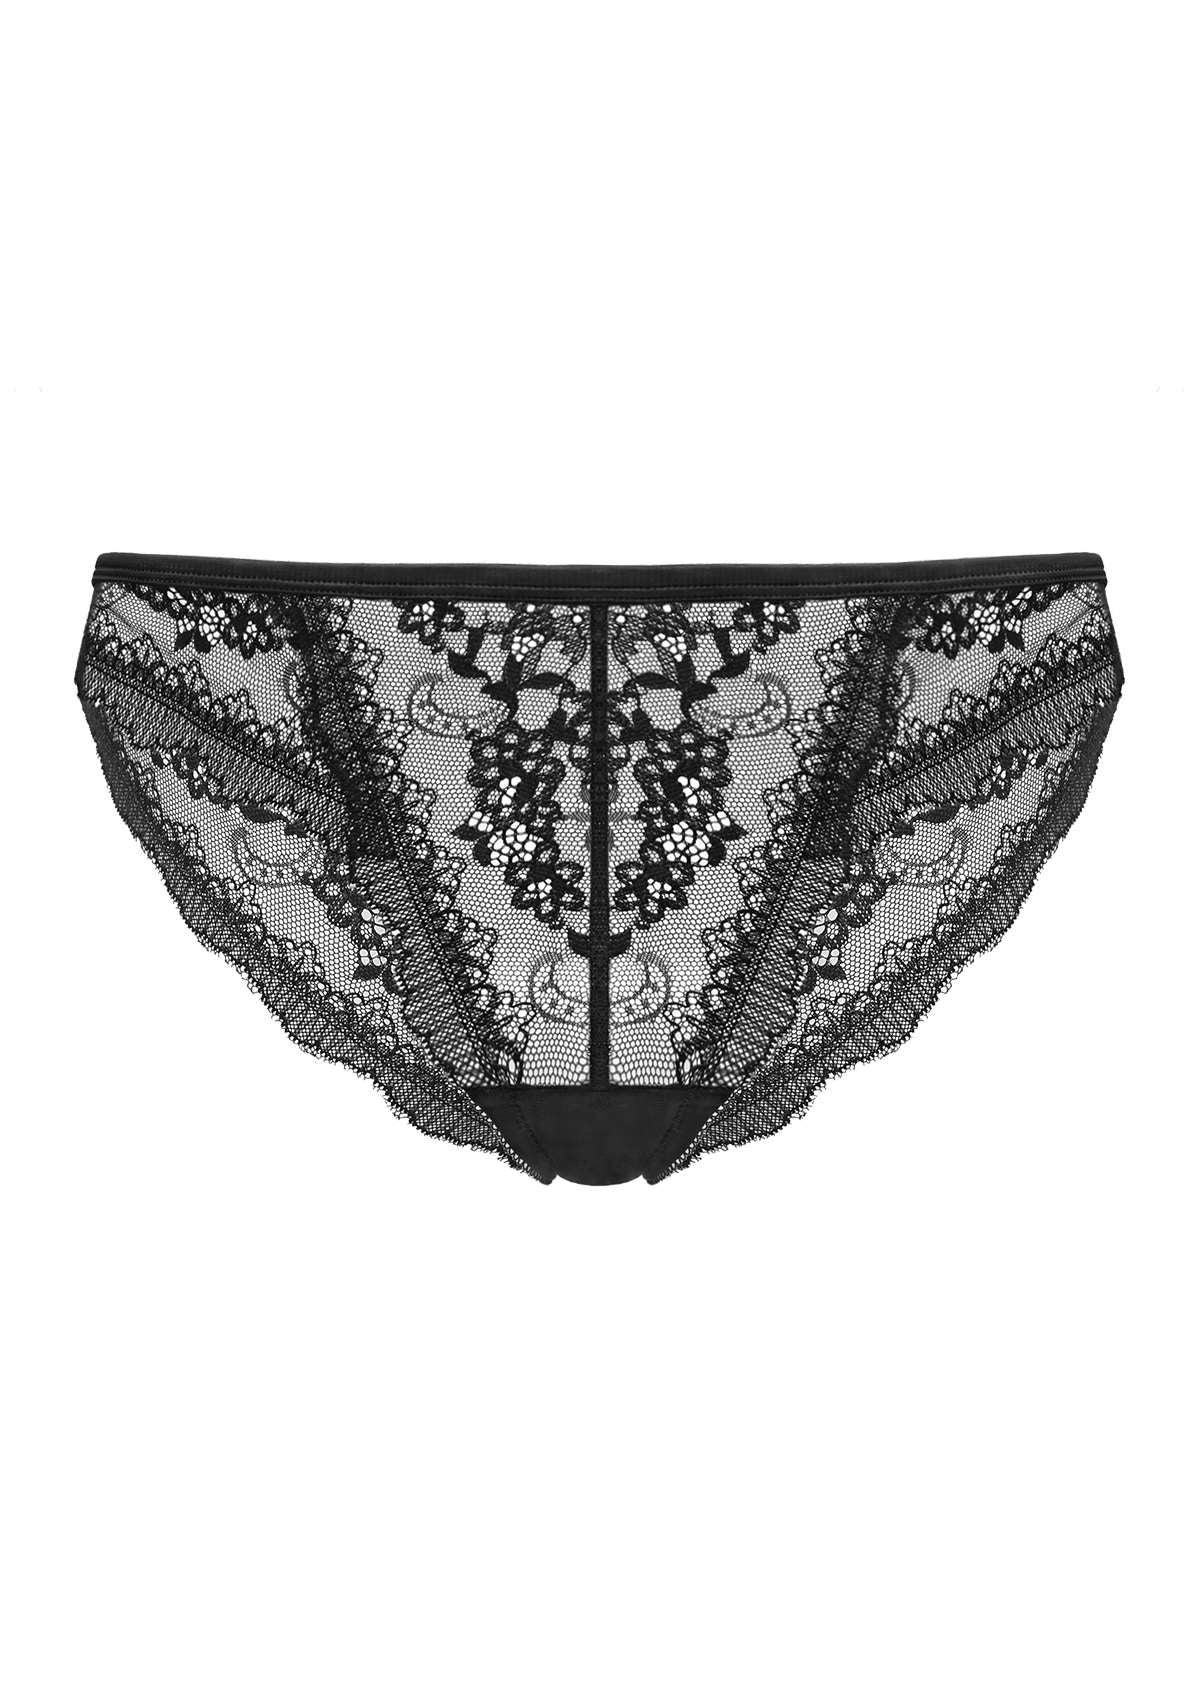 HSIA Floral Lace Bridal Cheeky Underwear: Delicate, Airy, And Comfy - Black / XL